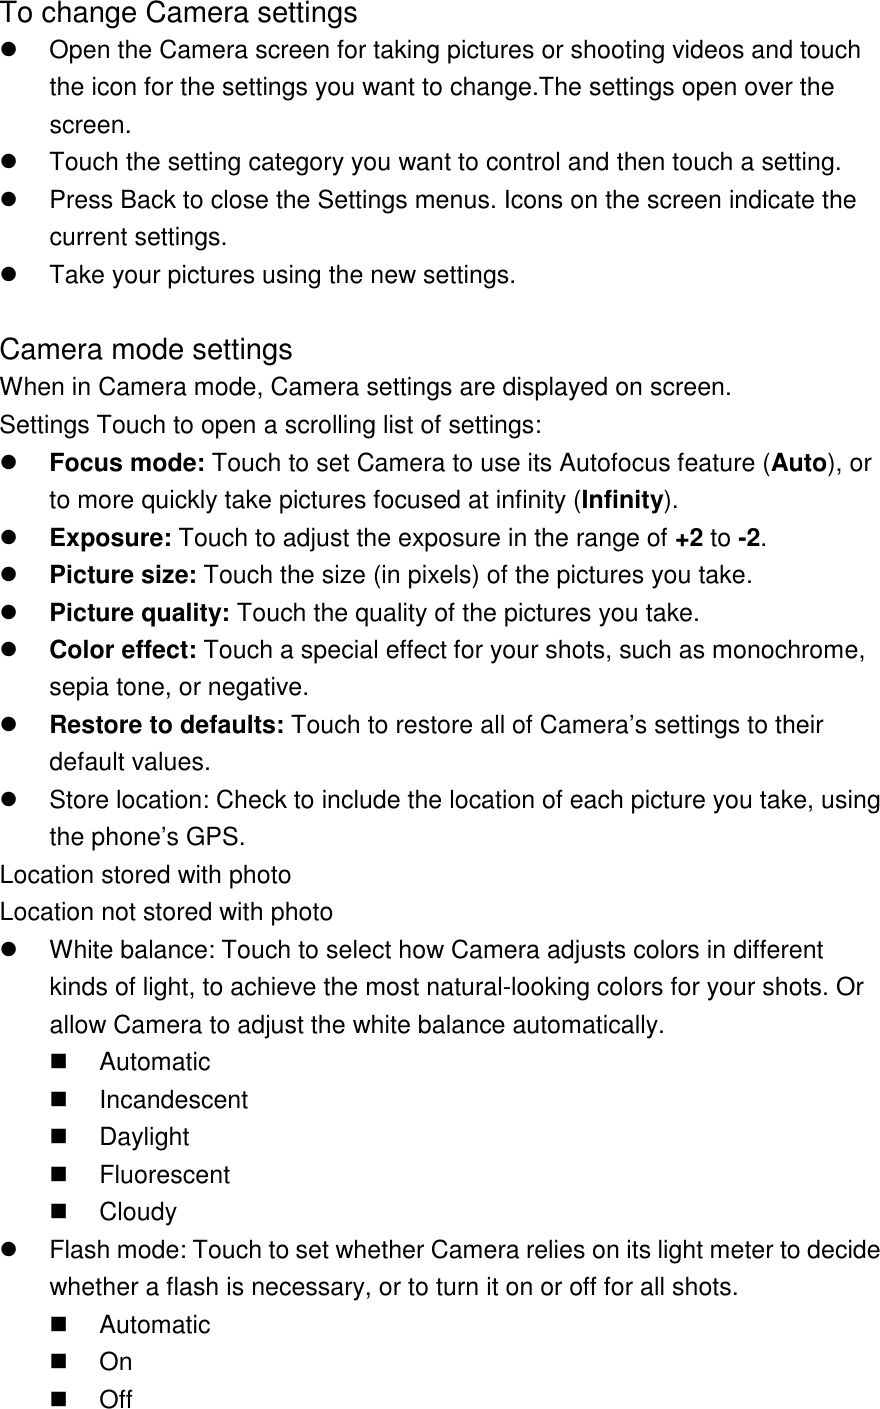 To change Camera settings   Open the Camera screen for taking pictures or shooting videos and touch the icon for the settings you want to change.The settings open over the screen.   Touch the setting category you want to control and then touch a setting.   Press Back to close the Settings menus. Icons on the screen indicate the current settings.   Take your pictures using the new settings.  Camera mode settings When in Camera mode, Camera settings are displayed on screen. Settings Touch to open a scrolling list of settings:  Focus mode: Touch to set Camera to use its Autofocus feature (Auto), or to more quickly take pictures focused at infinity (Infinity).  Exposure: Touch to adjust the exposure in the range of +2 to -2.  Picture size: Touch the size (in pixels) of the pictures you take.  Picture quality: Touch the quality of the pictures you take.  Color effect: Touch a special effect for your shots, such as monochrome, sepia tone, or negative.  Restore to defaults: Touch to restore all of Camera’s settings to their default values.   Store location: Check to include the location of each picture you take, using the phone’s GPS. Location stored with photo Location not stored with photo   White balance: Touch to select how Camera adjusts colors in different kinds of light, to achieve the most natural-looking colors for your shots. Or allow Camera to adjust the white balance automatically.   Automatic   Incandescent   Daylight   Fluorescent   Cloudy   Flash mode: Touch to set whether Camera relies on its light meter to decide whether a flash is necessary, or to turn it on or off for all shots.   Automatic   On   Off 